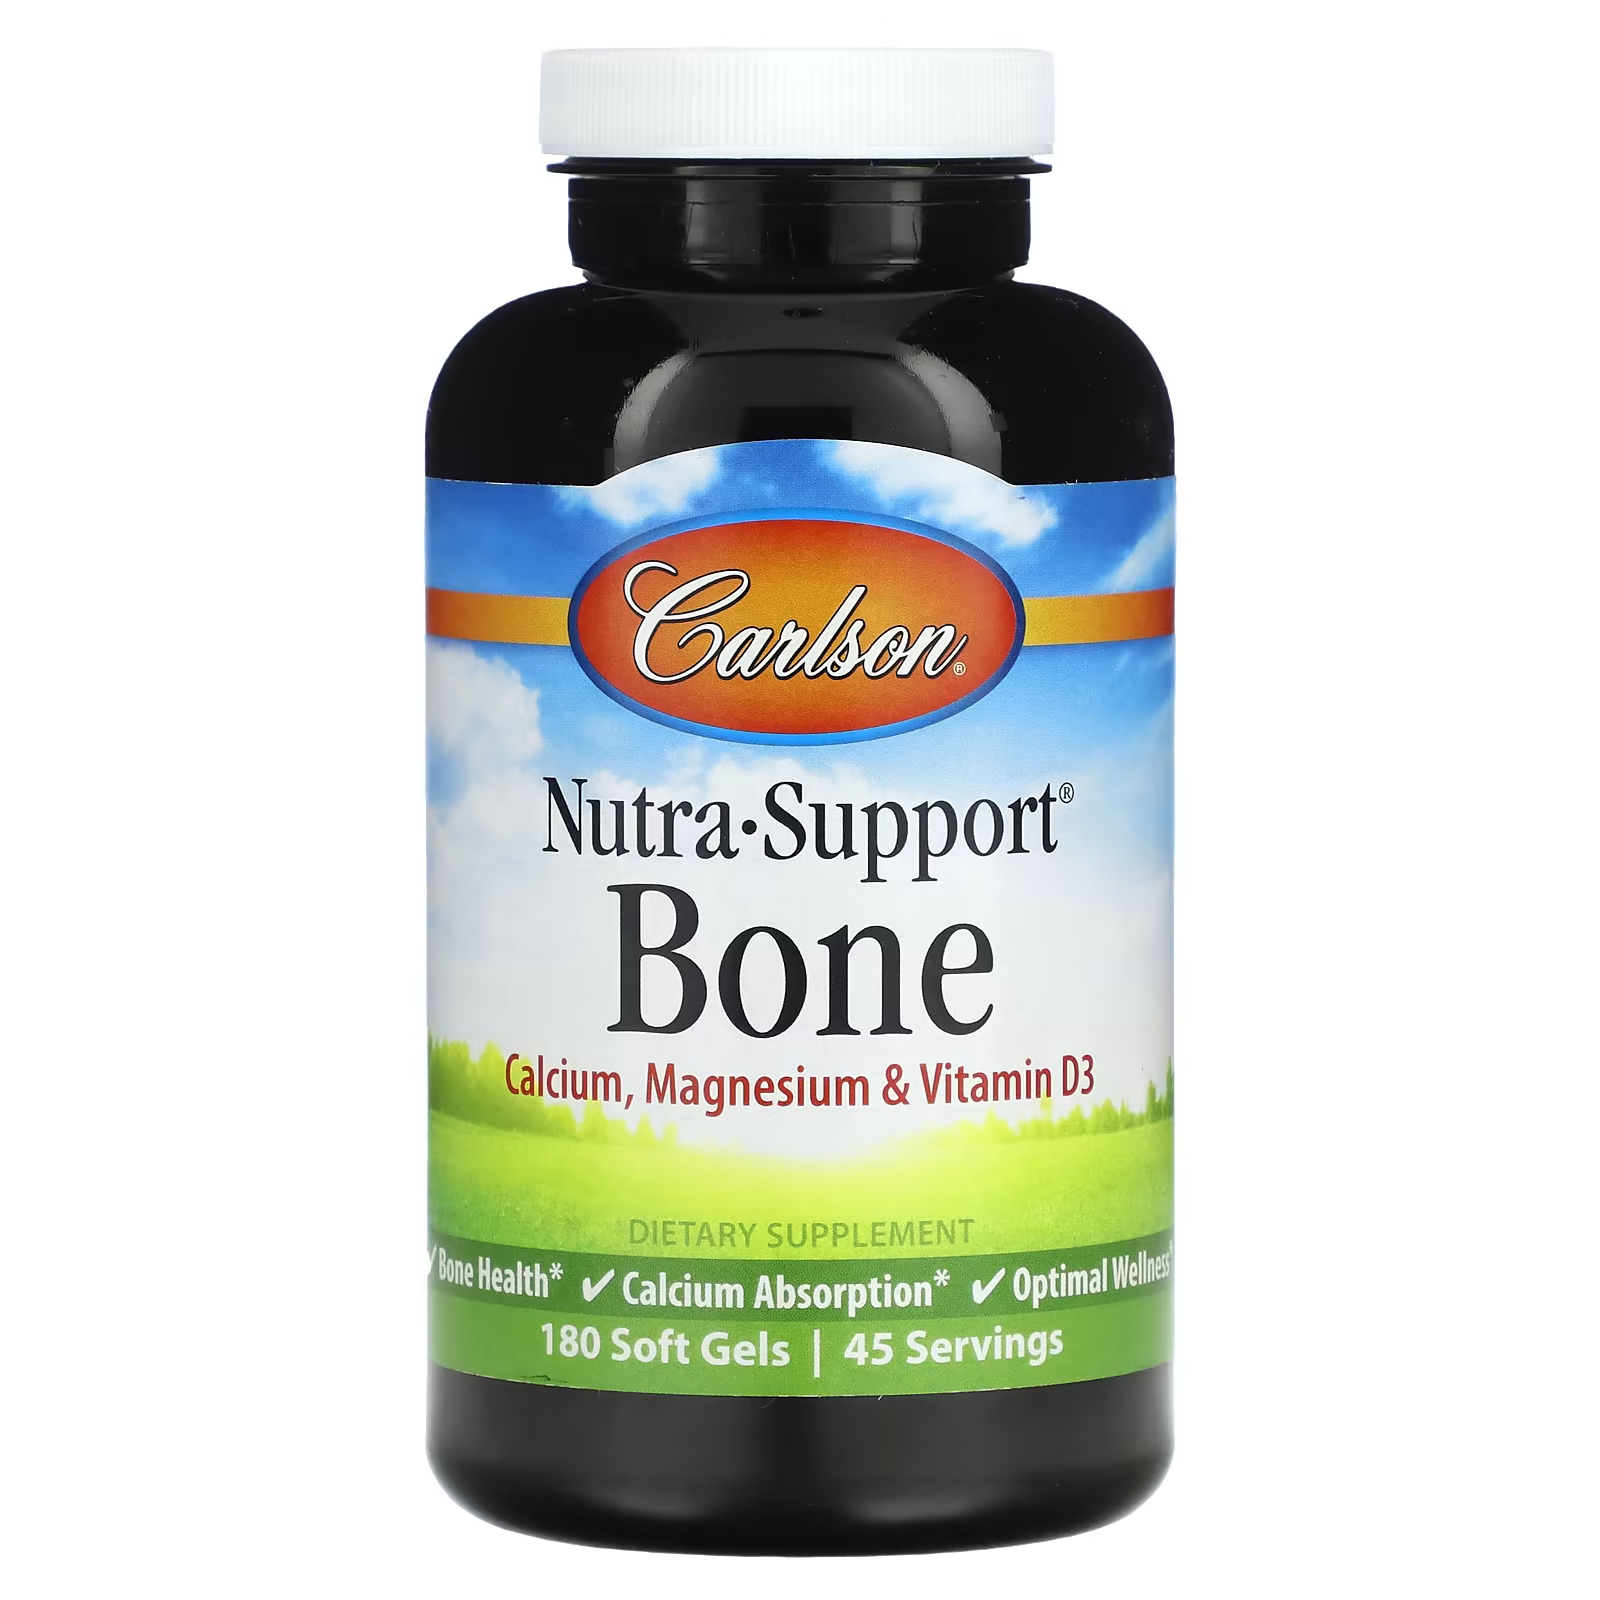 carlson nutra support prostate 60 мягких таблеток Carlson Nutra-Support Bone 180 мягких гелей